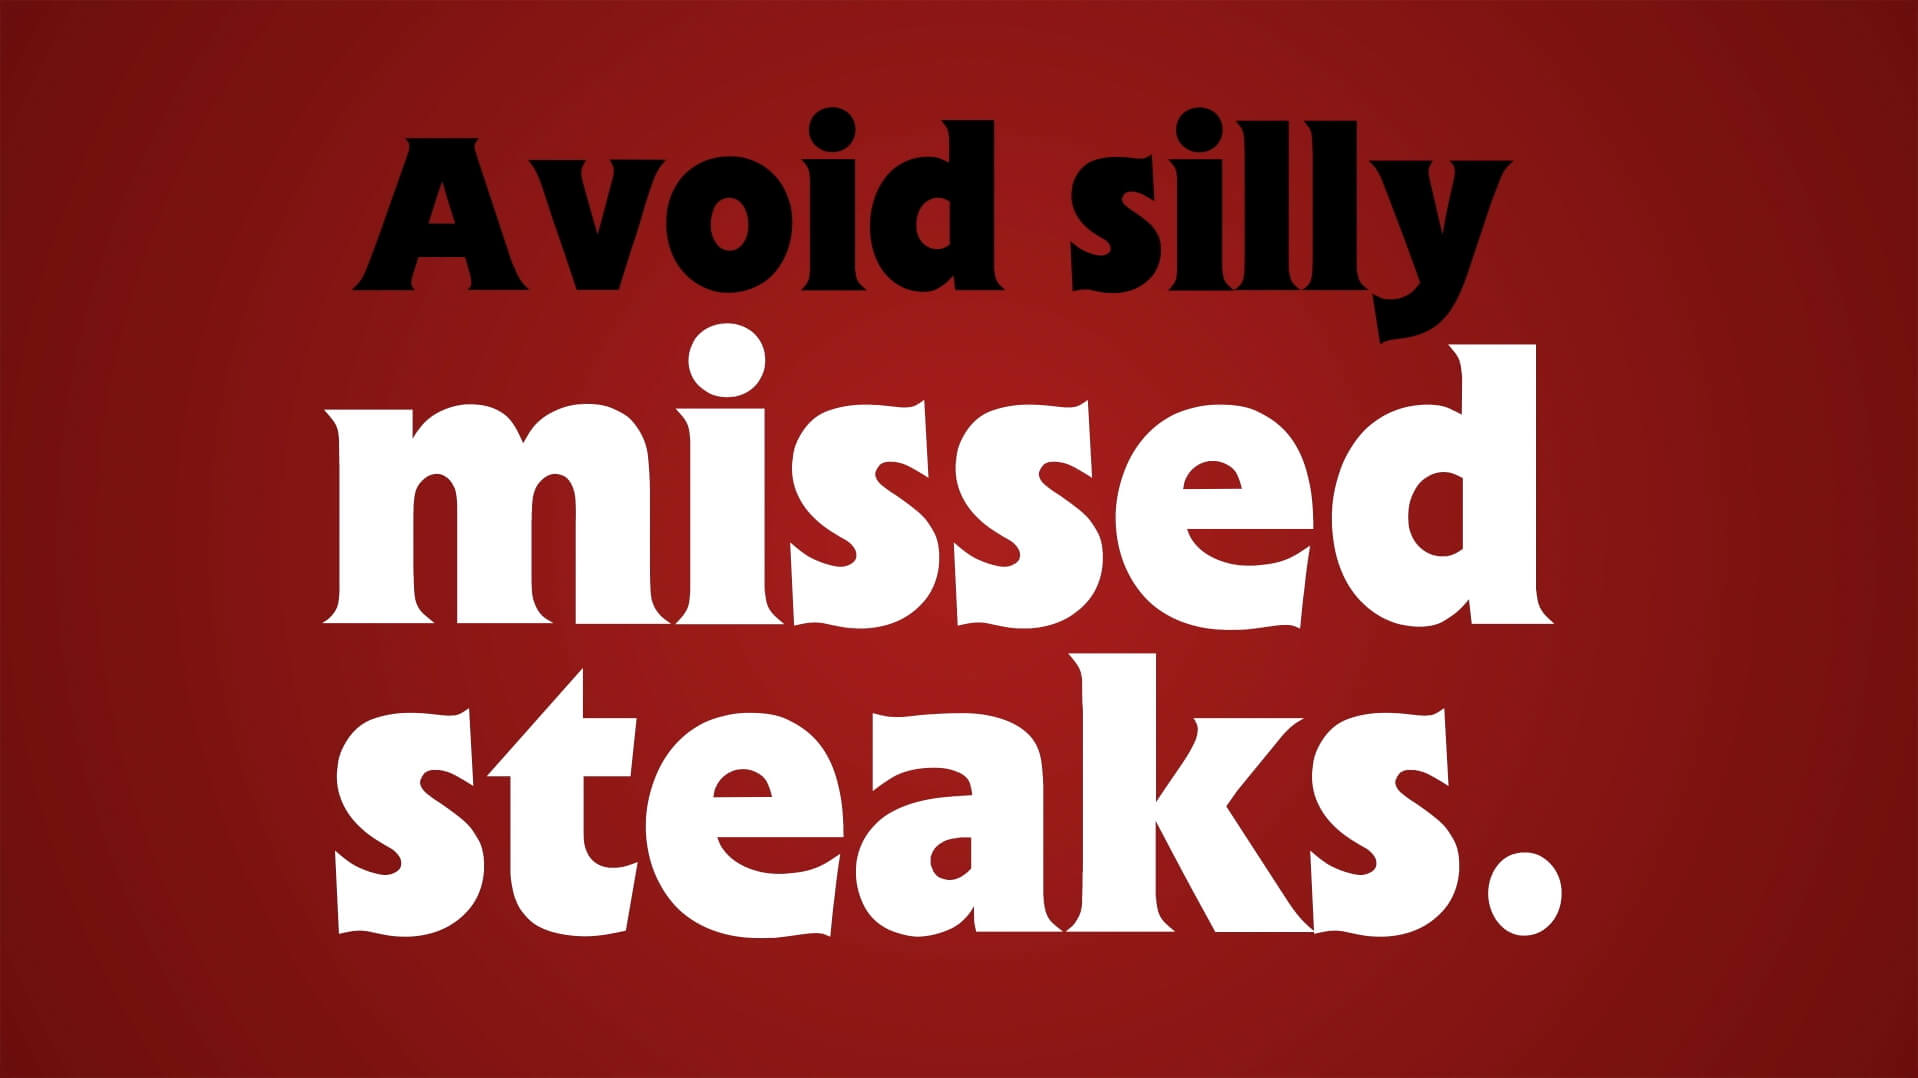 Avoid Silly Missed Steaks #1 - A Trim Down There